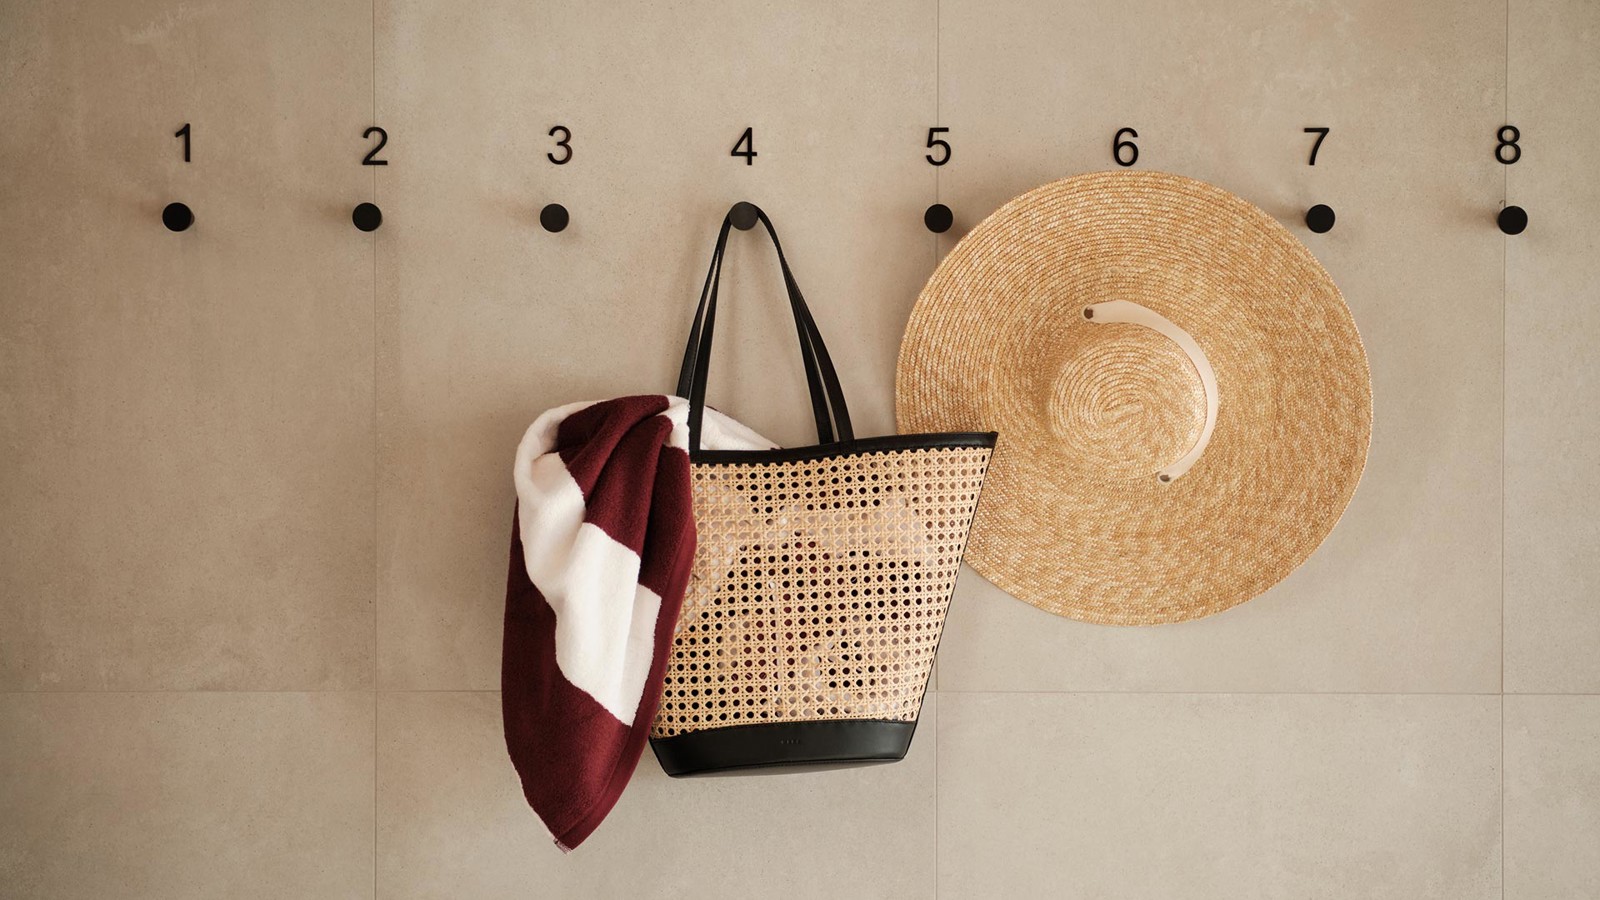 Straw hat, bag and towel hung on the wall